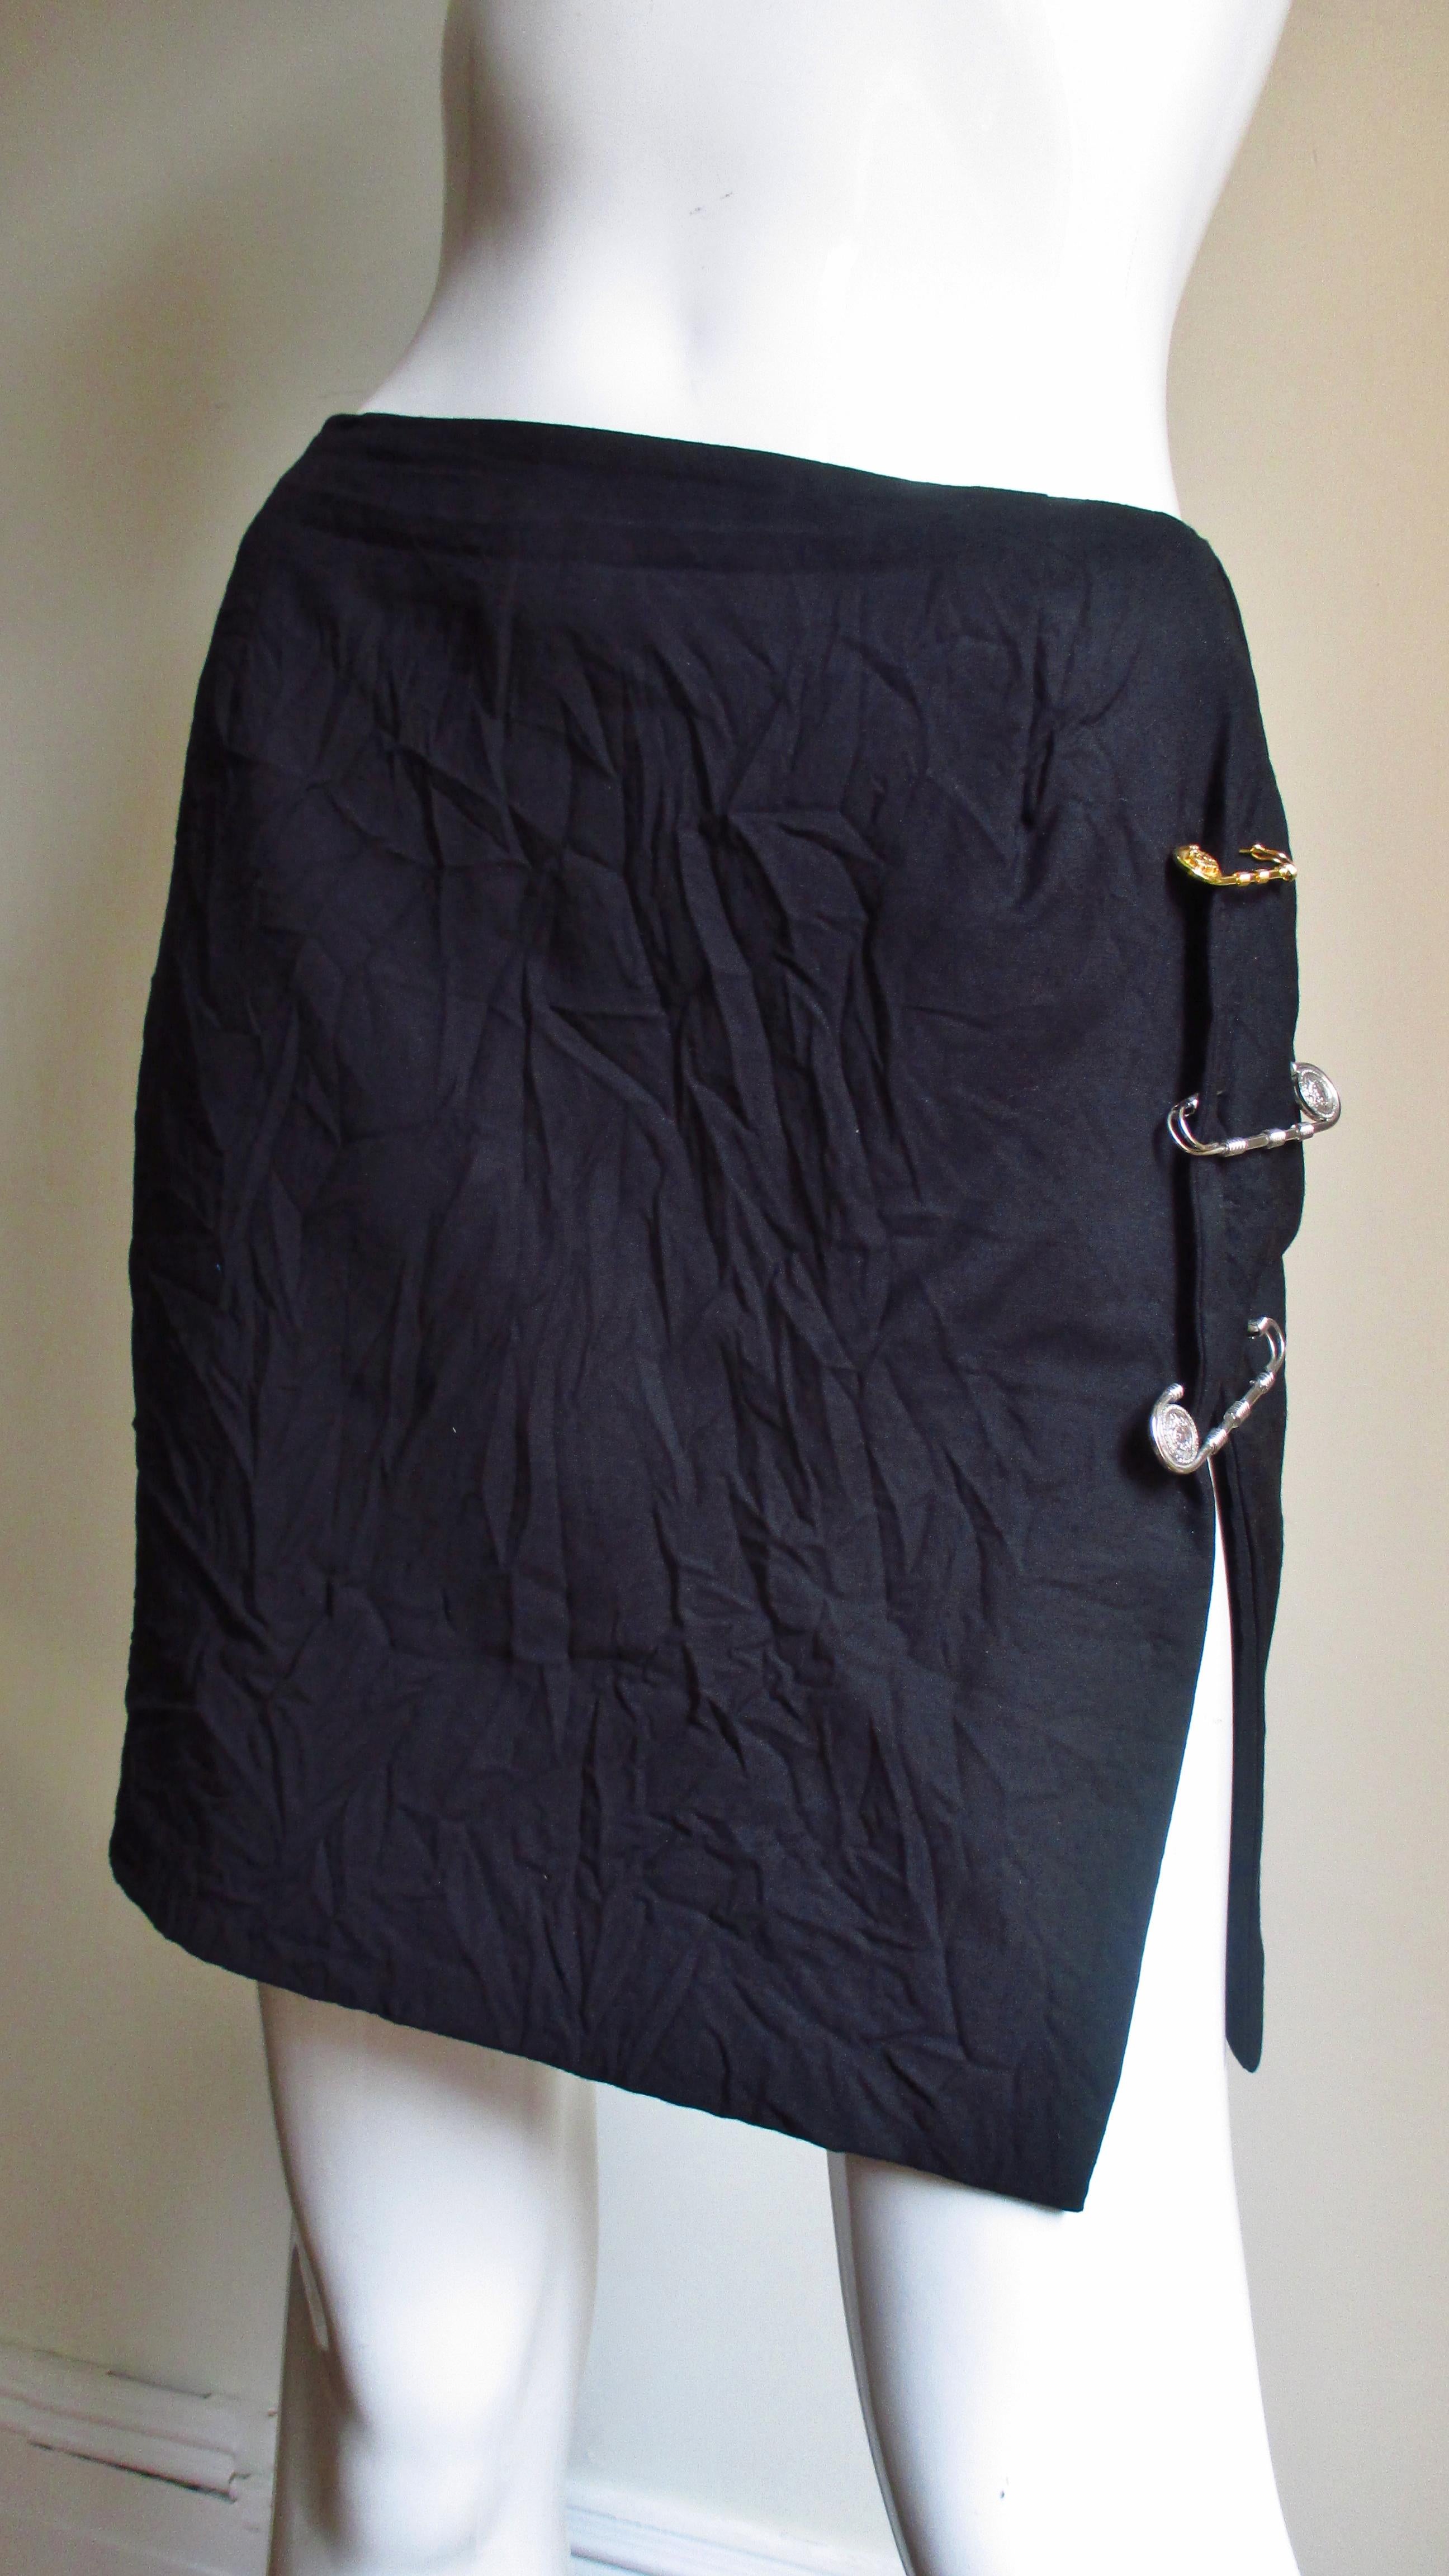 Black 1990s Iconic Gianni Versace Safety Pin Skirt